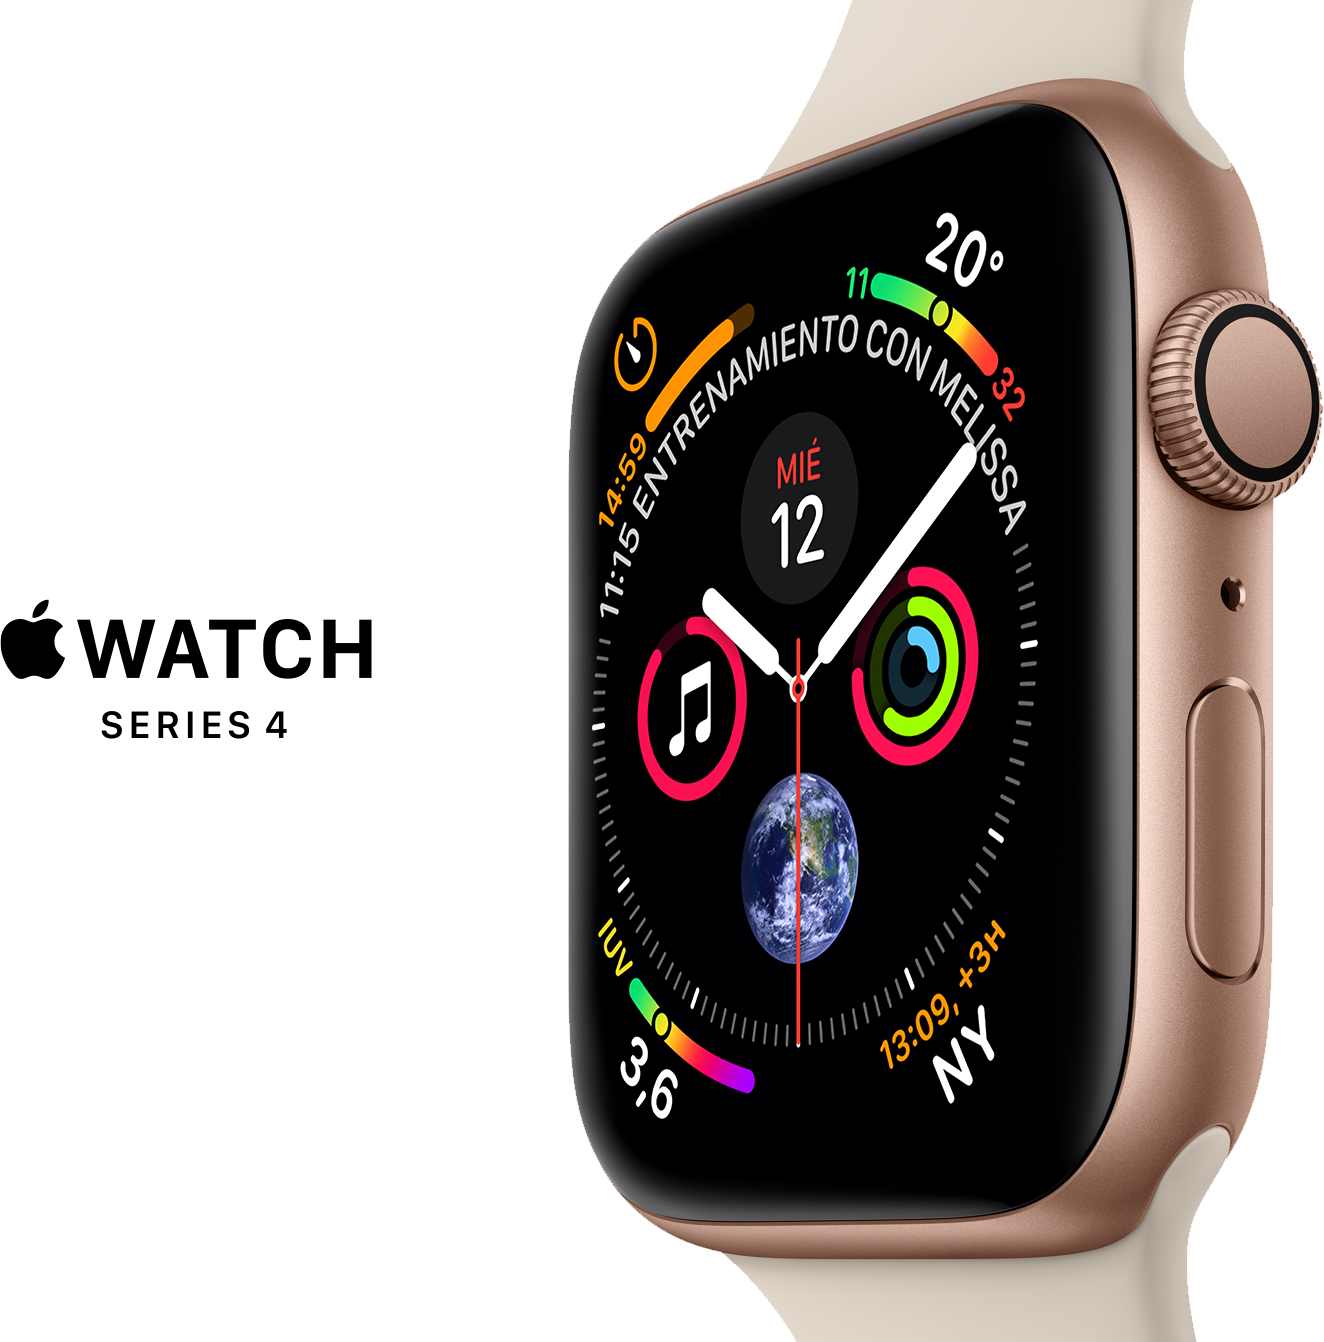 süreç bir miktar kolza  Reloj Apple Watch Series 4 GPS 44m Oro Rosado Ktronix — PNG Share - Your  Source for High Quality PNG images, Transparent images, & Cliparts, Free  Unlimited Downloads